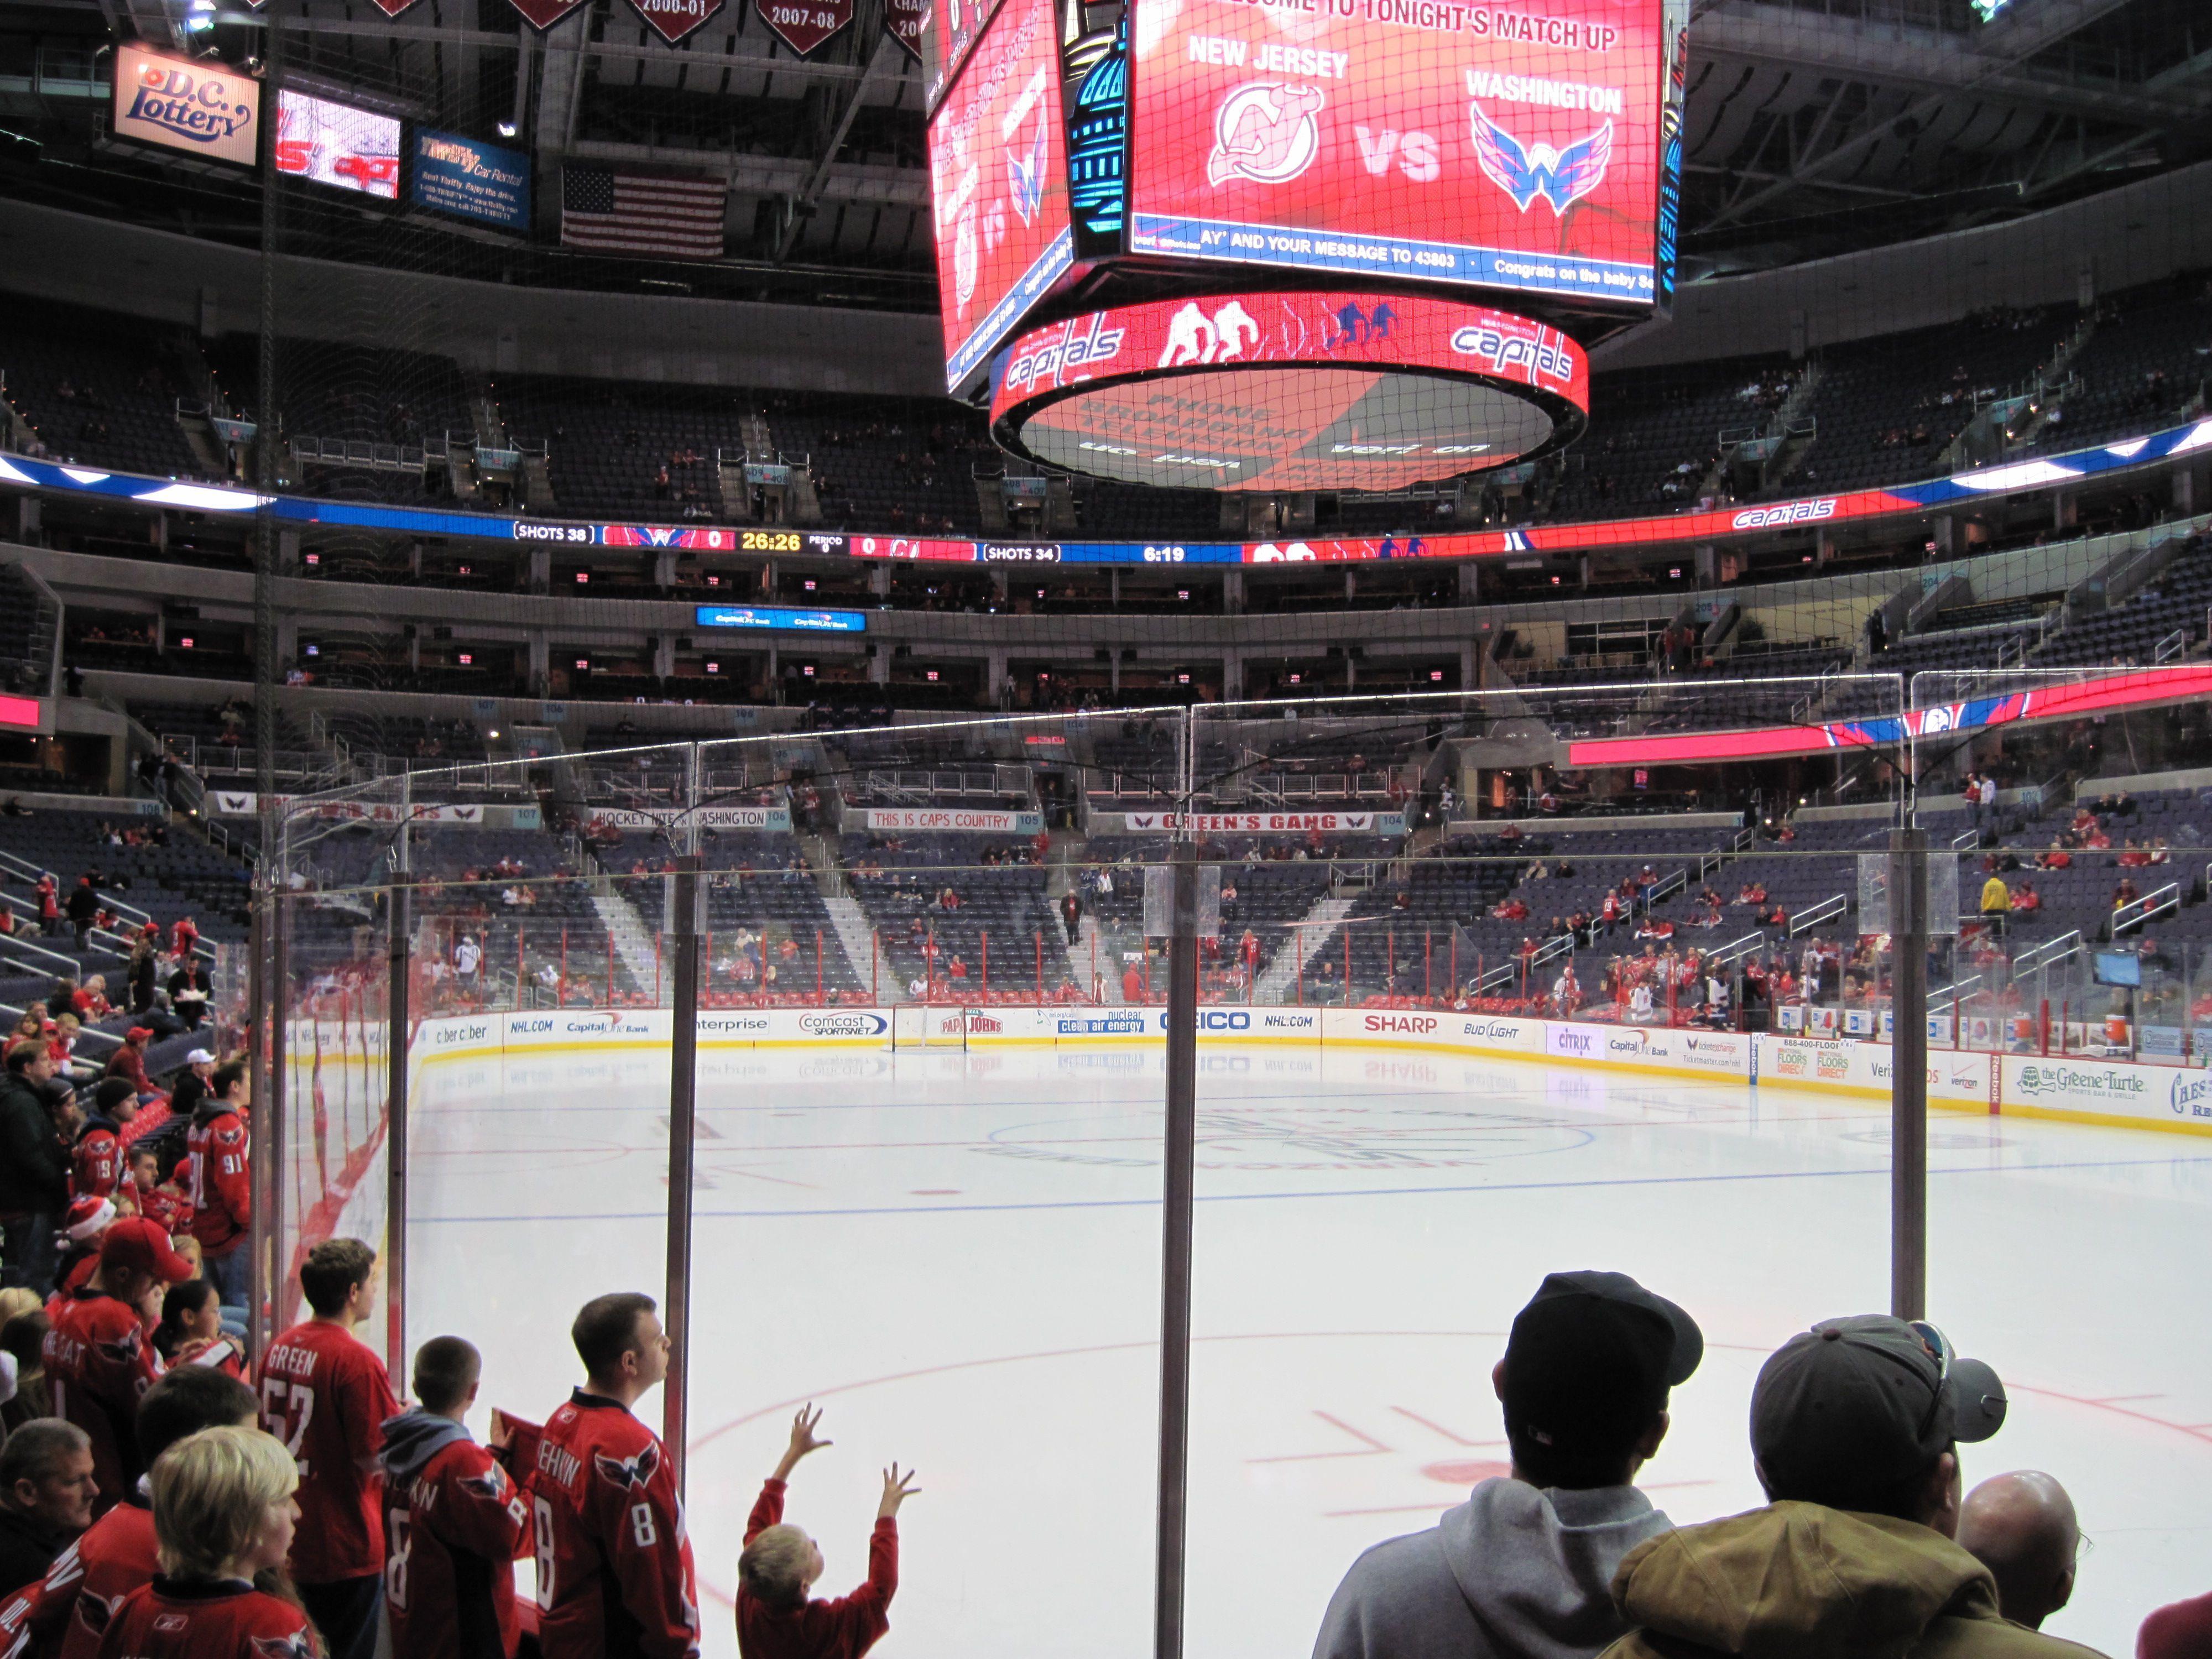 Capital One Arena, section 409, home of Washington Capitals